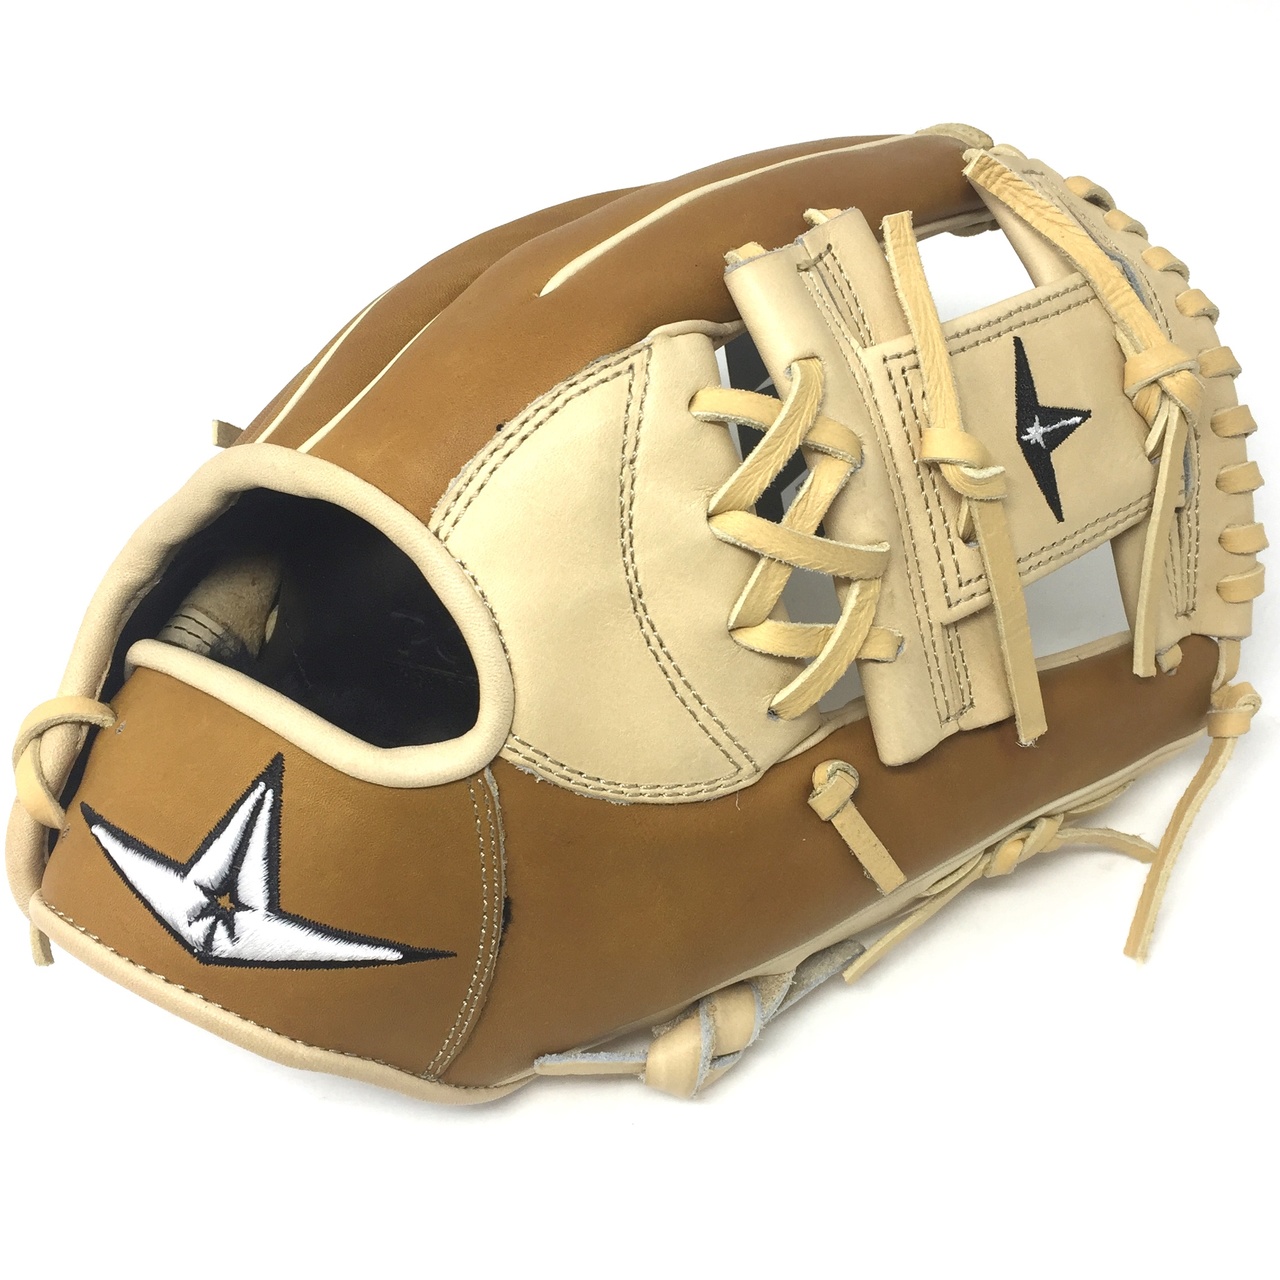 all-star-pro-elite-11-5-i-web-baseball-glove-right-hand-throw-cream-saddle-tan FGAS-1150I-CRSDL-RightHandThrow All-Star 029343048333 What makes Pro Elite the most trusted mitt behind the dish